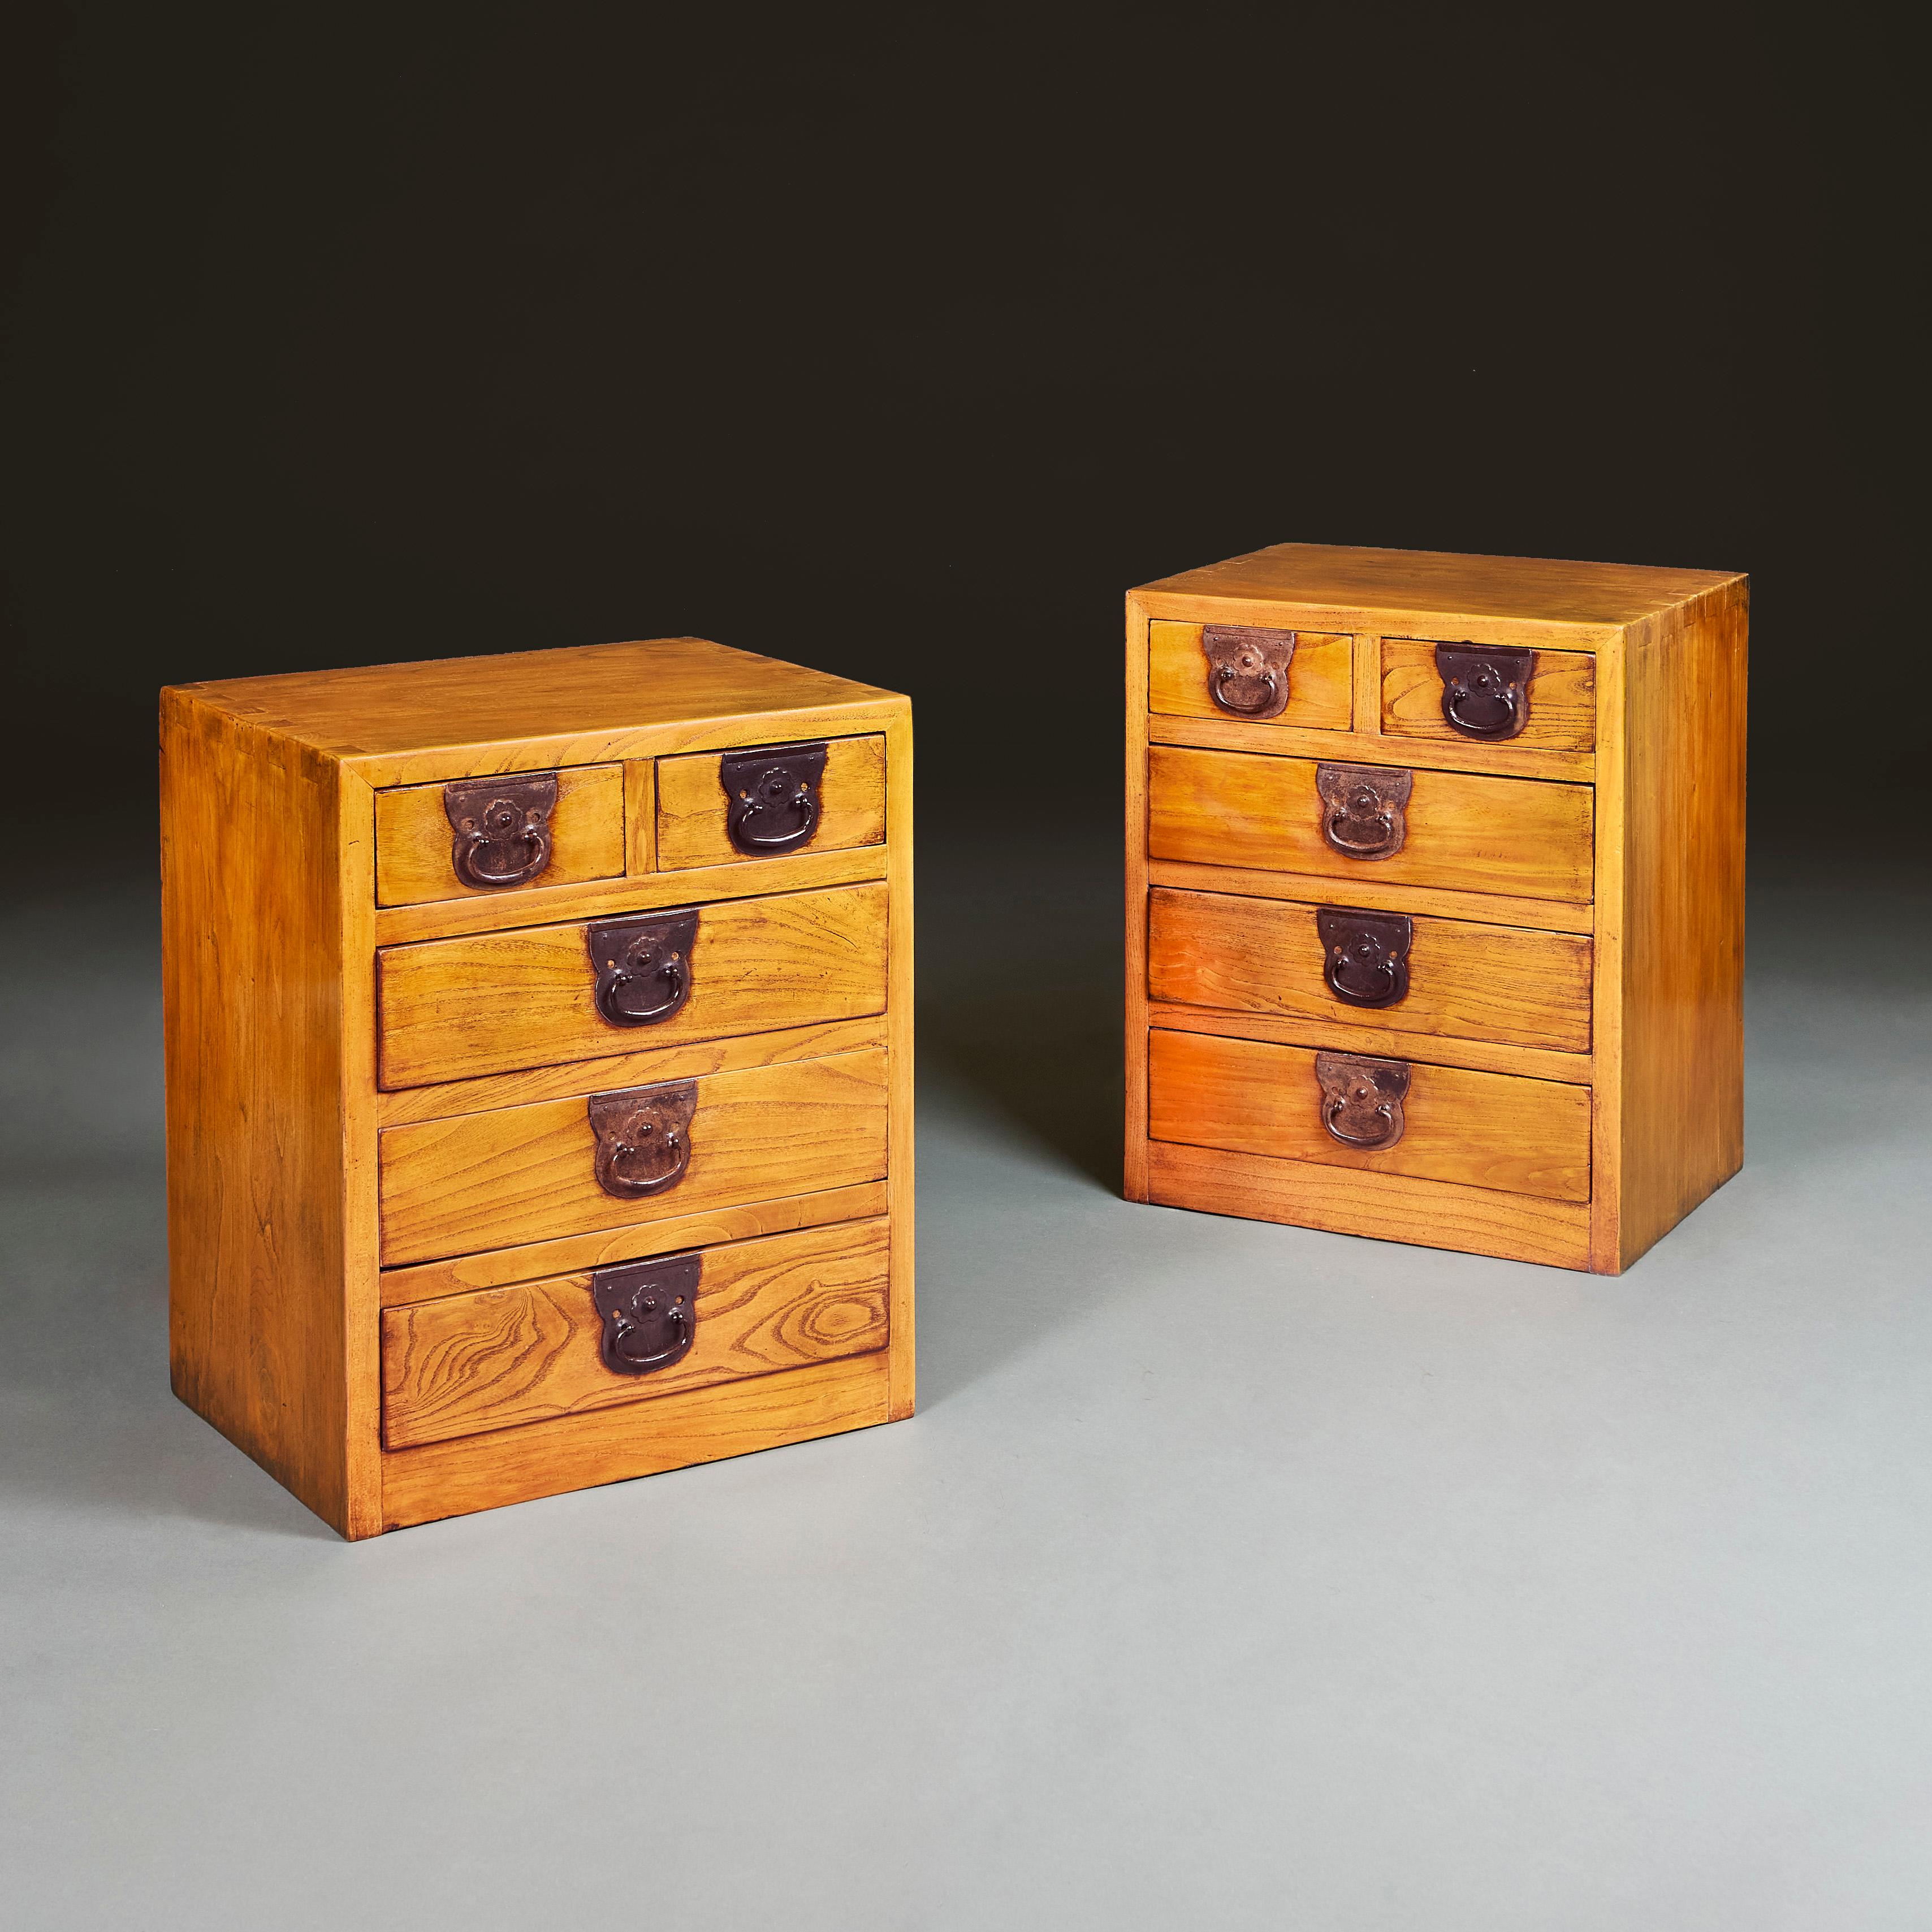 Japan, circa 1860

A pair of late nineteenth century Tansu elm bedside cabinets with three lowers draws and two short draws and beaten metal styled loop handles.

Height 54.00cm
Width 45.00cm
Depth 34.50cm.